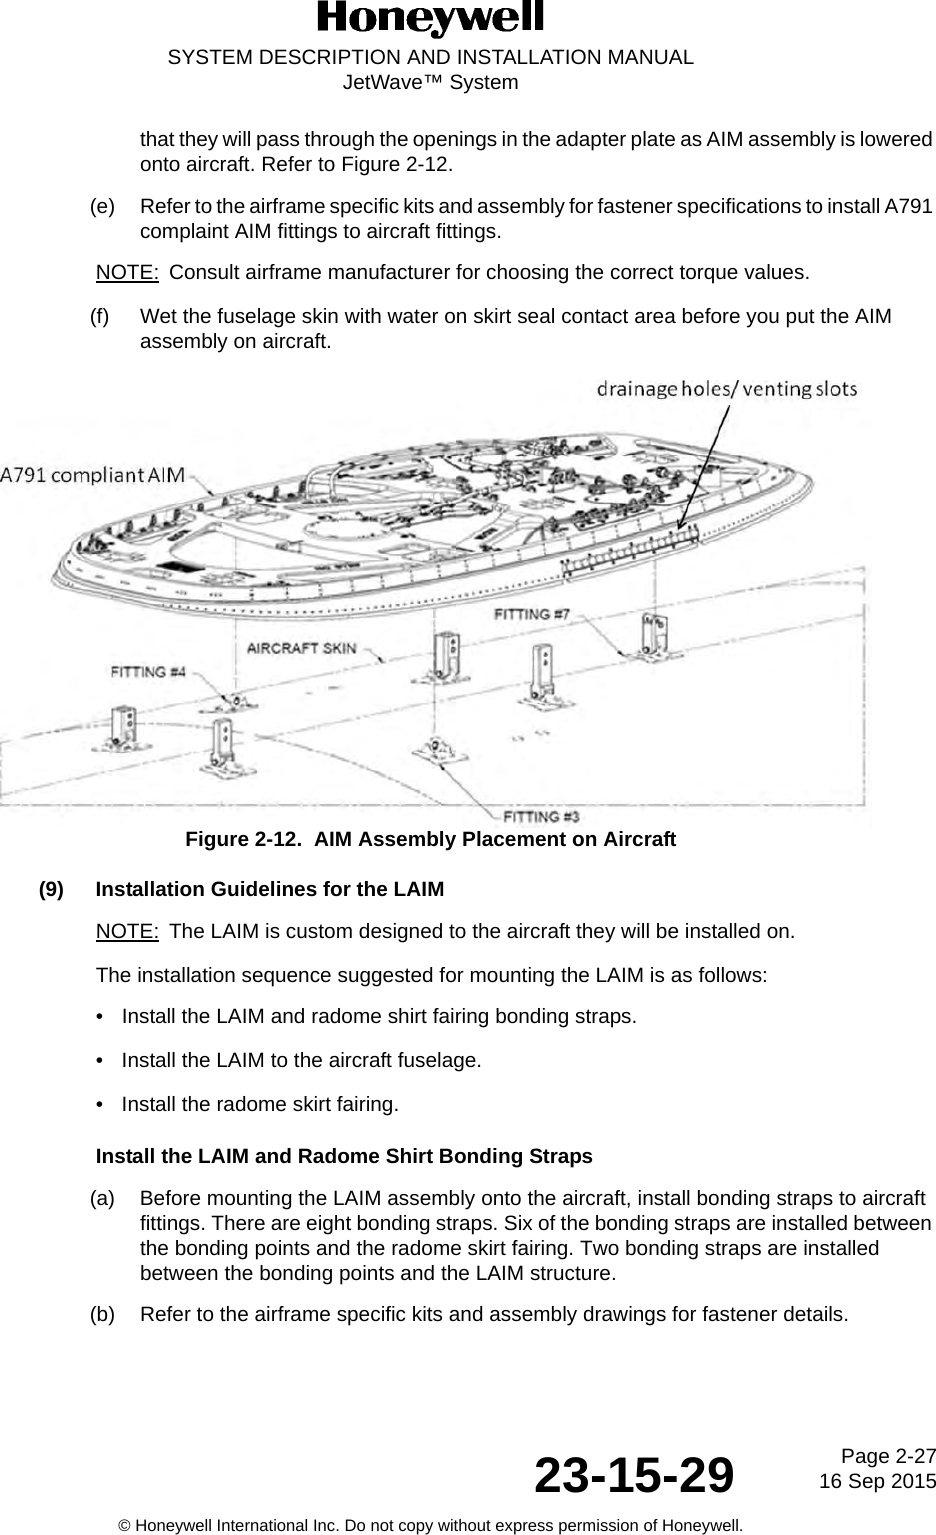 Page 2-27 16 Sep 201523-15-29SYSTEM DESCRIPTION AND INSTALLATION MANUALJetWave™ System© Honeywell International Inc. Do not copy without express permission of Honeywell.that they will pass through the openings in the adapter plate as AIM assembly is lowered onto aircraft. Refer to Figure 2-12.(e) Refer to the airframe specific kits and assembly for fastener specifications to install A791 complaint AIM fittings to aircraft fittings. NOTE: Consult airframe manufacturer for choosing the correct torque values. (f) Wet the fuselage skin with water on skirt seal contact area before you put the AIM assembly on aircraft.Figure 2-12.  AIM Assembly Placement on Aircraft(9) Installation Guidelines for the LAIMNOTE: The LAIM is custom designed to the aircraft they will be installed on.The installation sequence suggested for mounting the LAIM is as follows: • Install the LAIM and radome shirt fairing bonding straps.• Install the LAIM to the aircraft fuselage.• Install the radome skirt fairing.Install the LAIM and Radome Shirt Bonding Straps(a) Before mounting the LAIM assembly onto the aircraft, install bonding straps to aircraft fittings. There are eight bonding straps. Six of the bonding straps are installed between the bonding points and the radome skirt fairing. Two bonding straps are installed between the bonding points and the LAIM structure. (b) Refer to the airframe specific kits and assembly drawings for fastener details. 